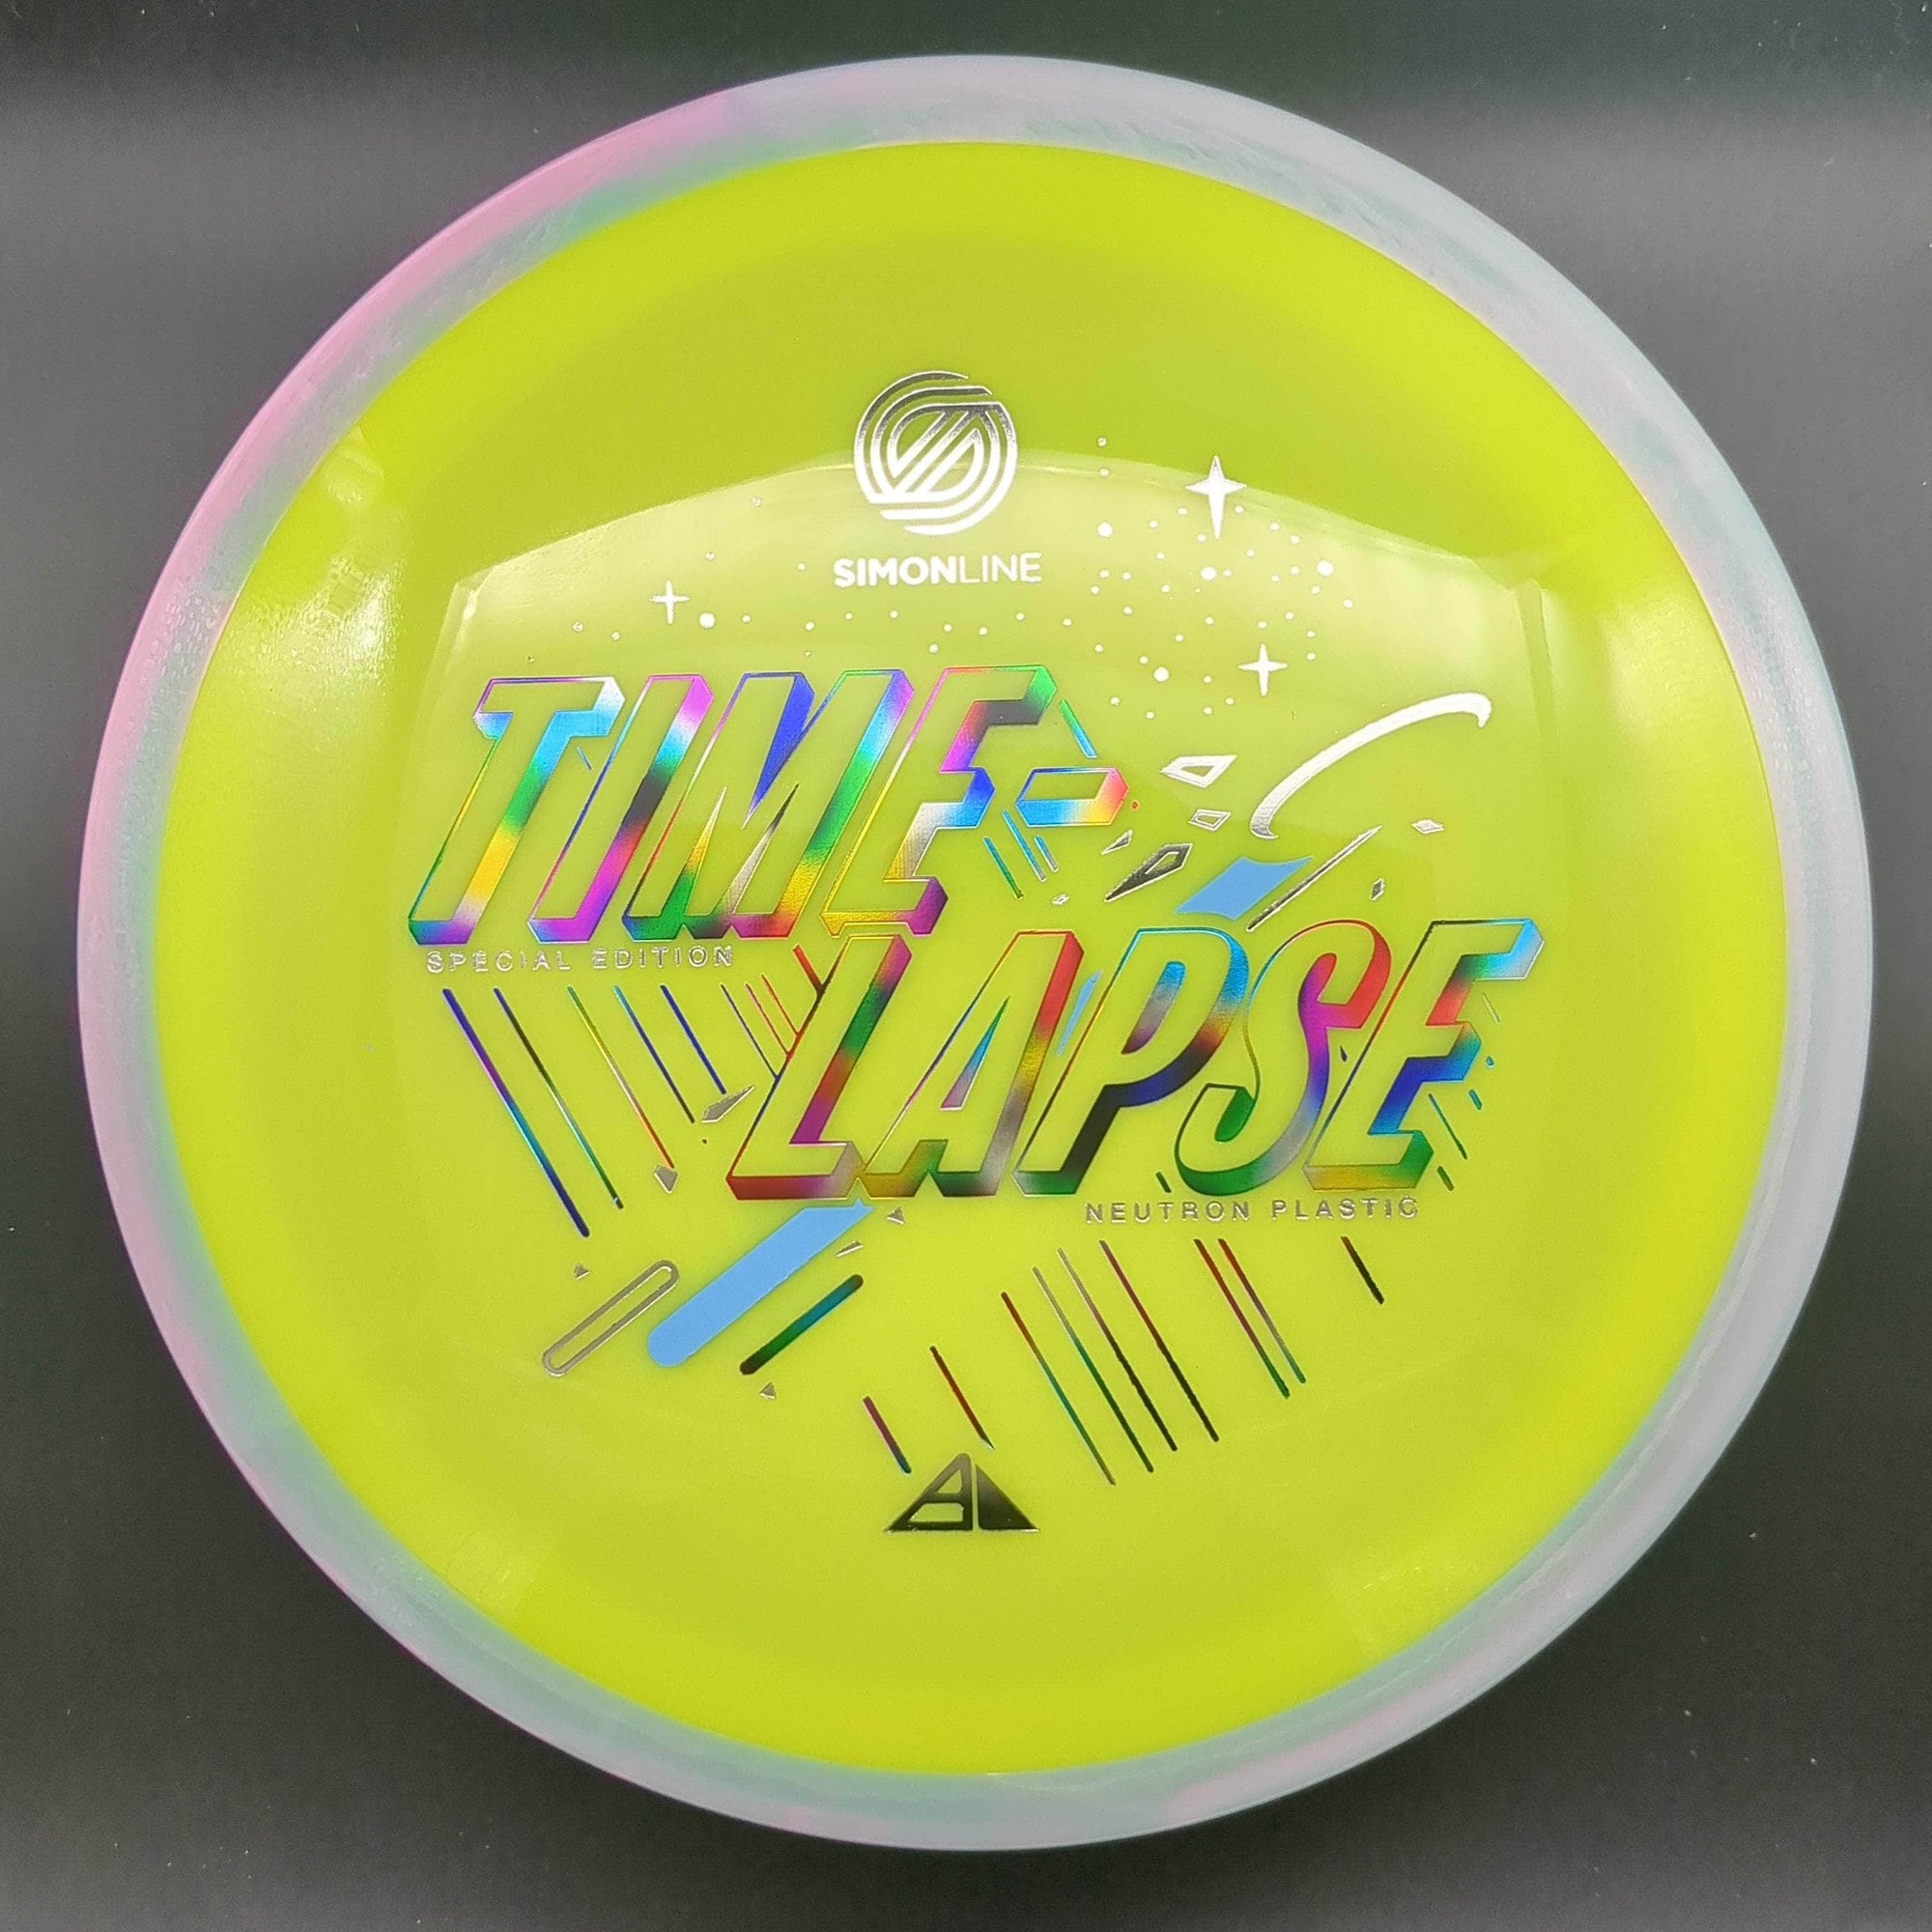 Axiom Distance Driver Pink/Teal Rim Yellow 174g Time Lapse, Neutron, Special Edition